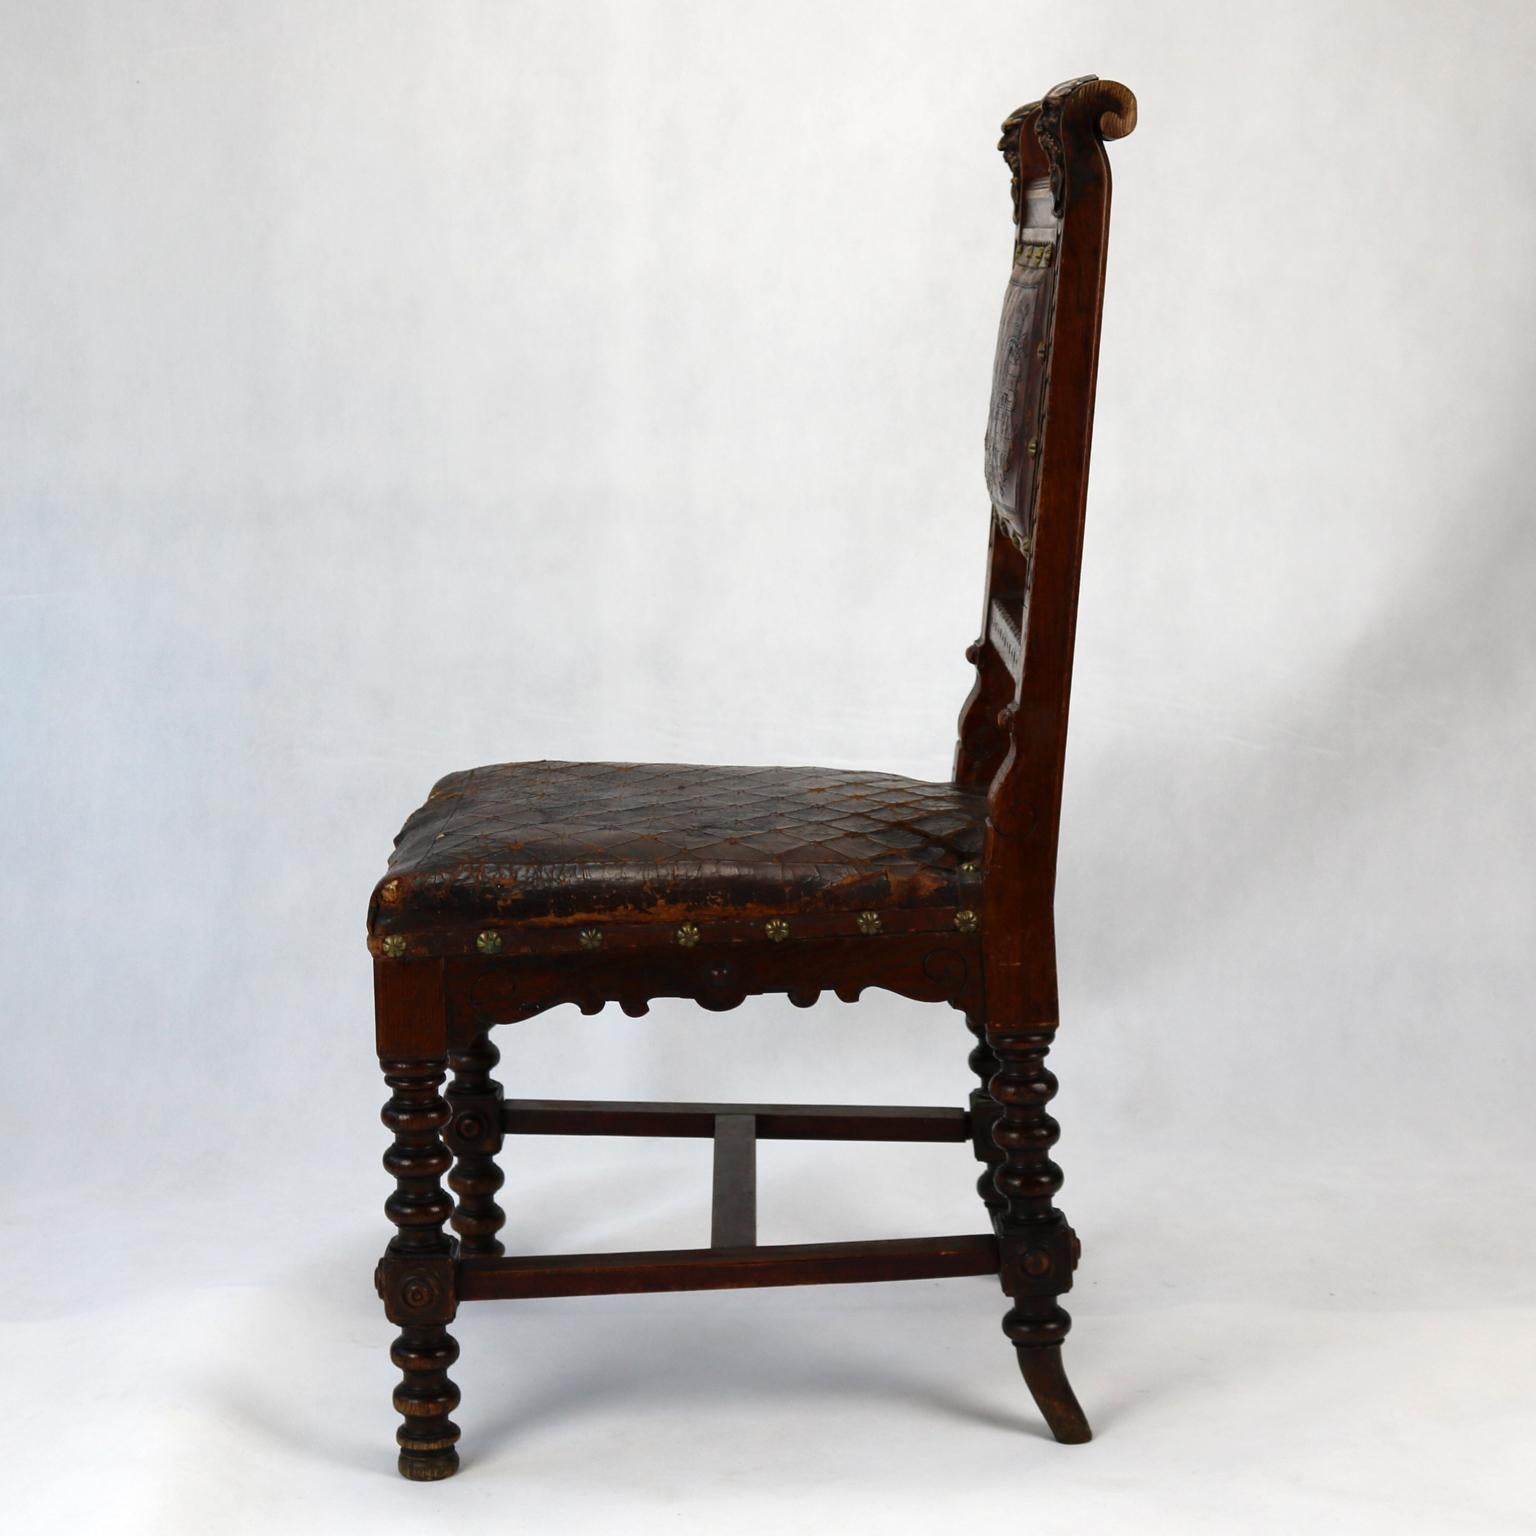 Hungarian Reanaissance Revival Hand-Carved Chair with Embossed Leather 19th Century For Sale